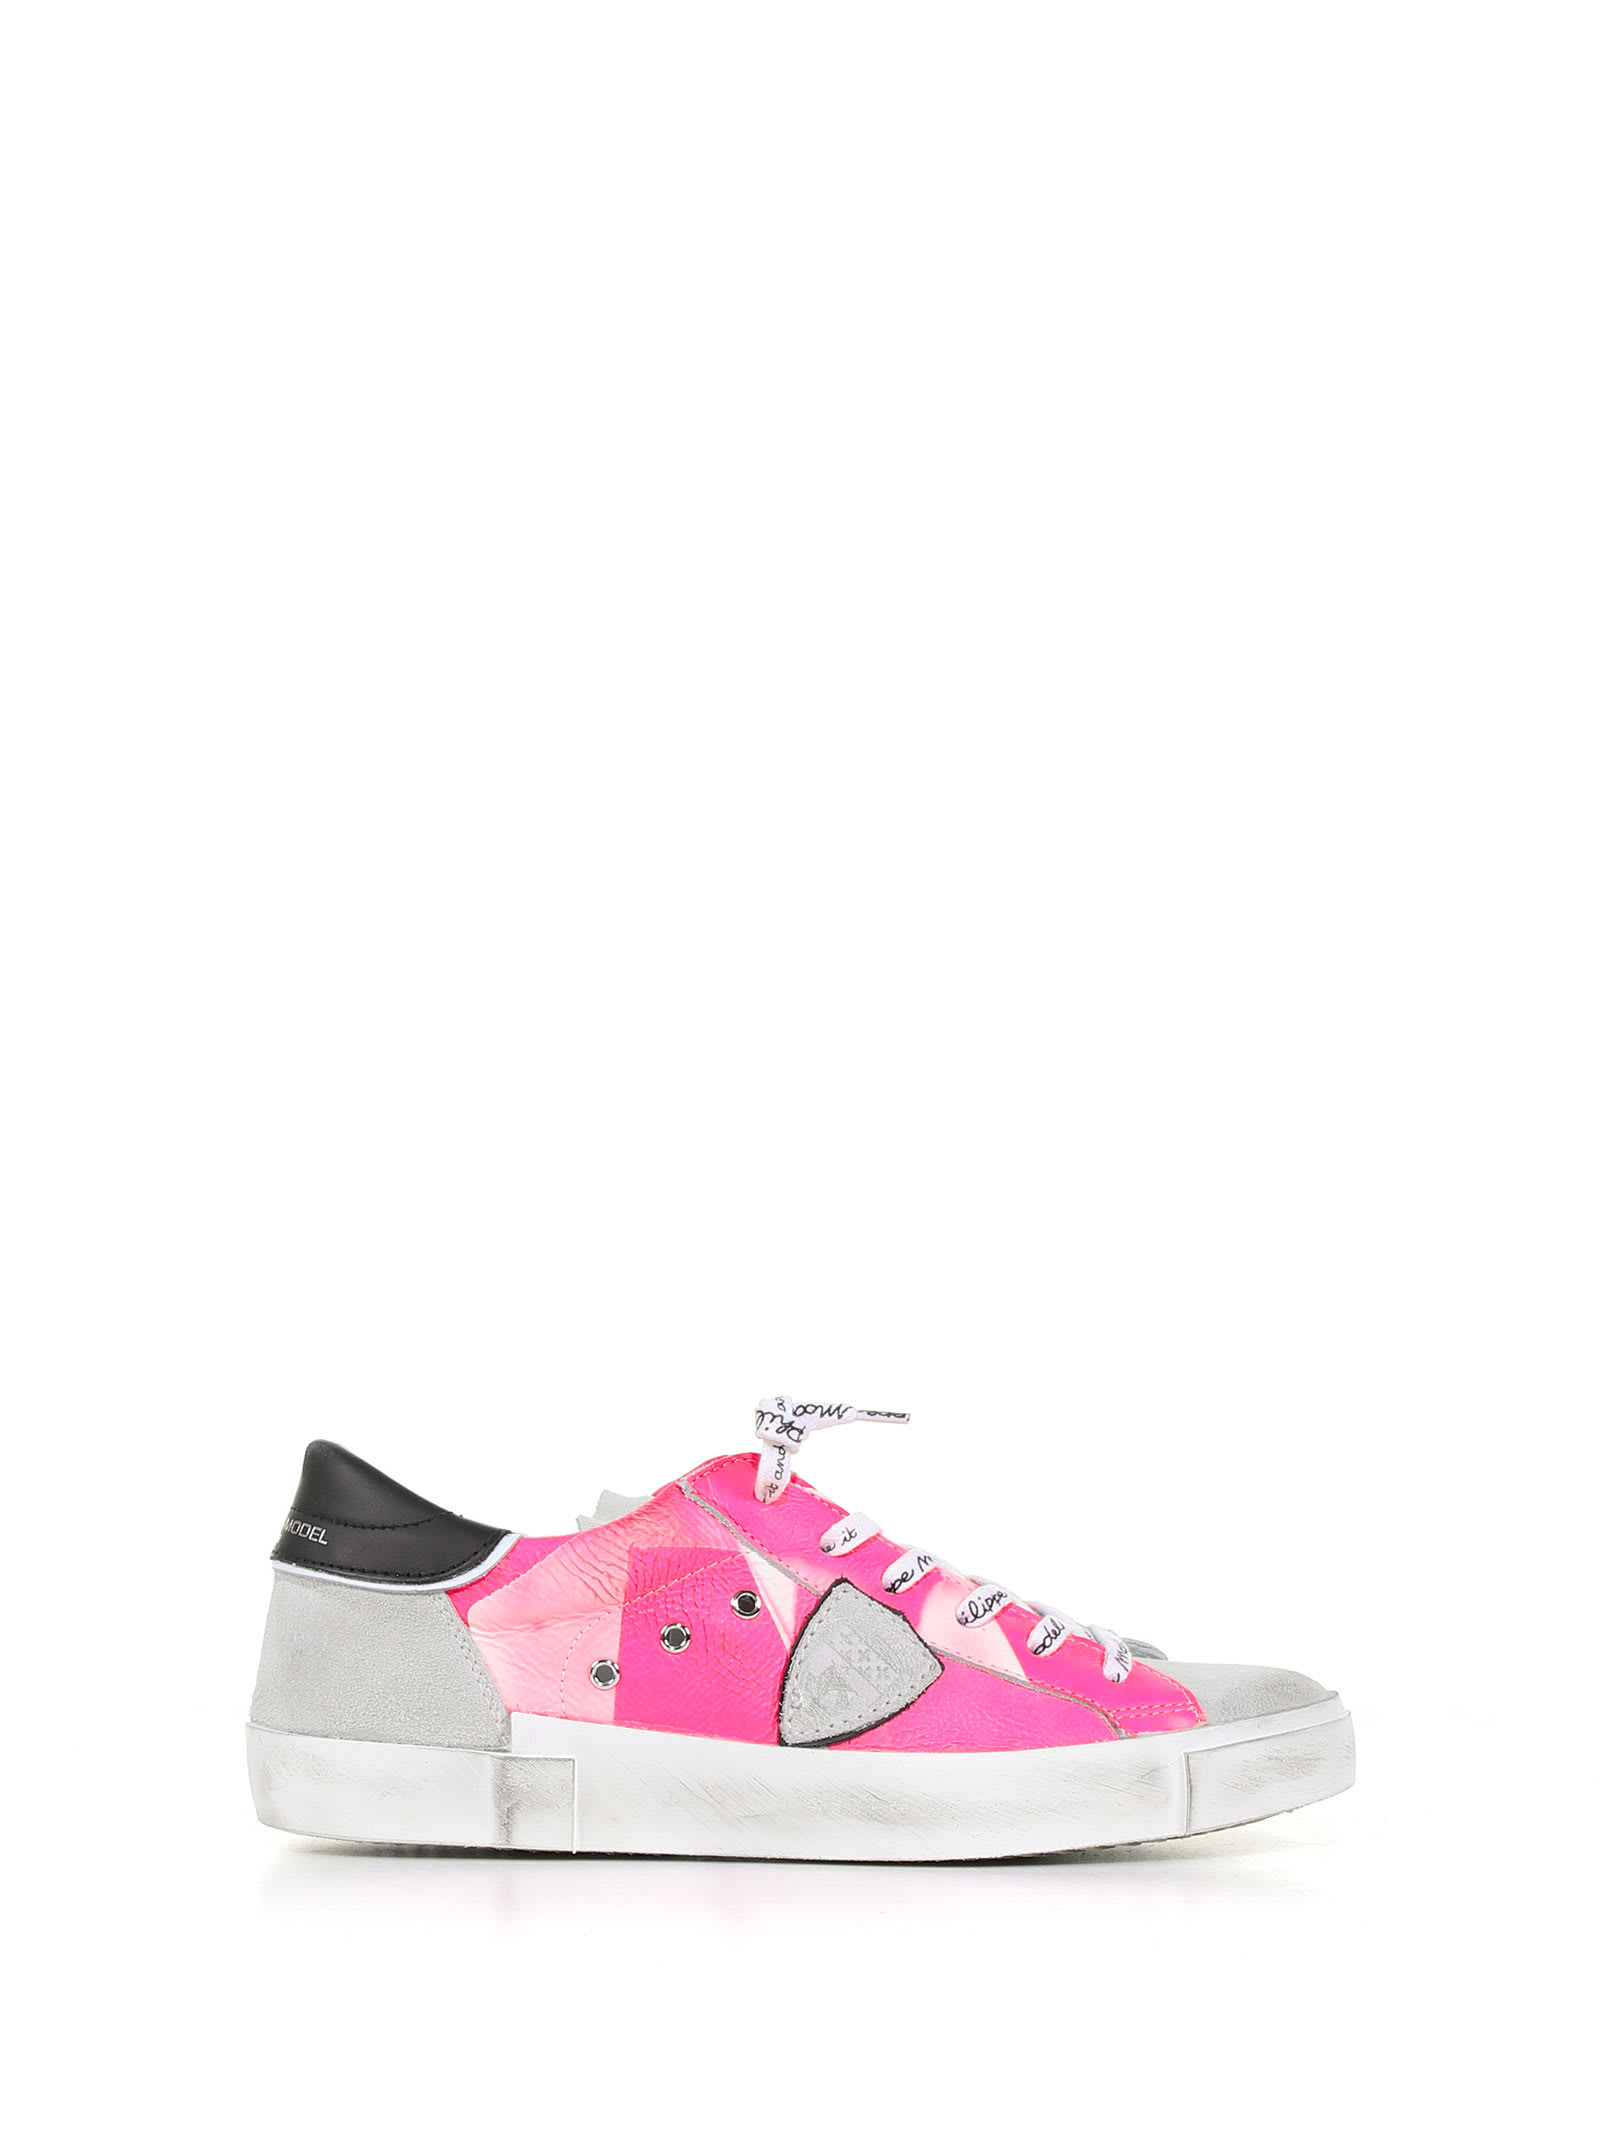 Philippe Model Prsx Batik Leather Sneaker With Suede Details